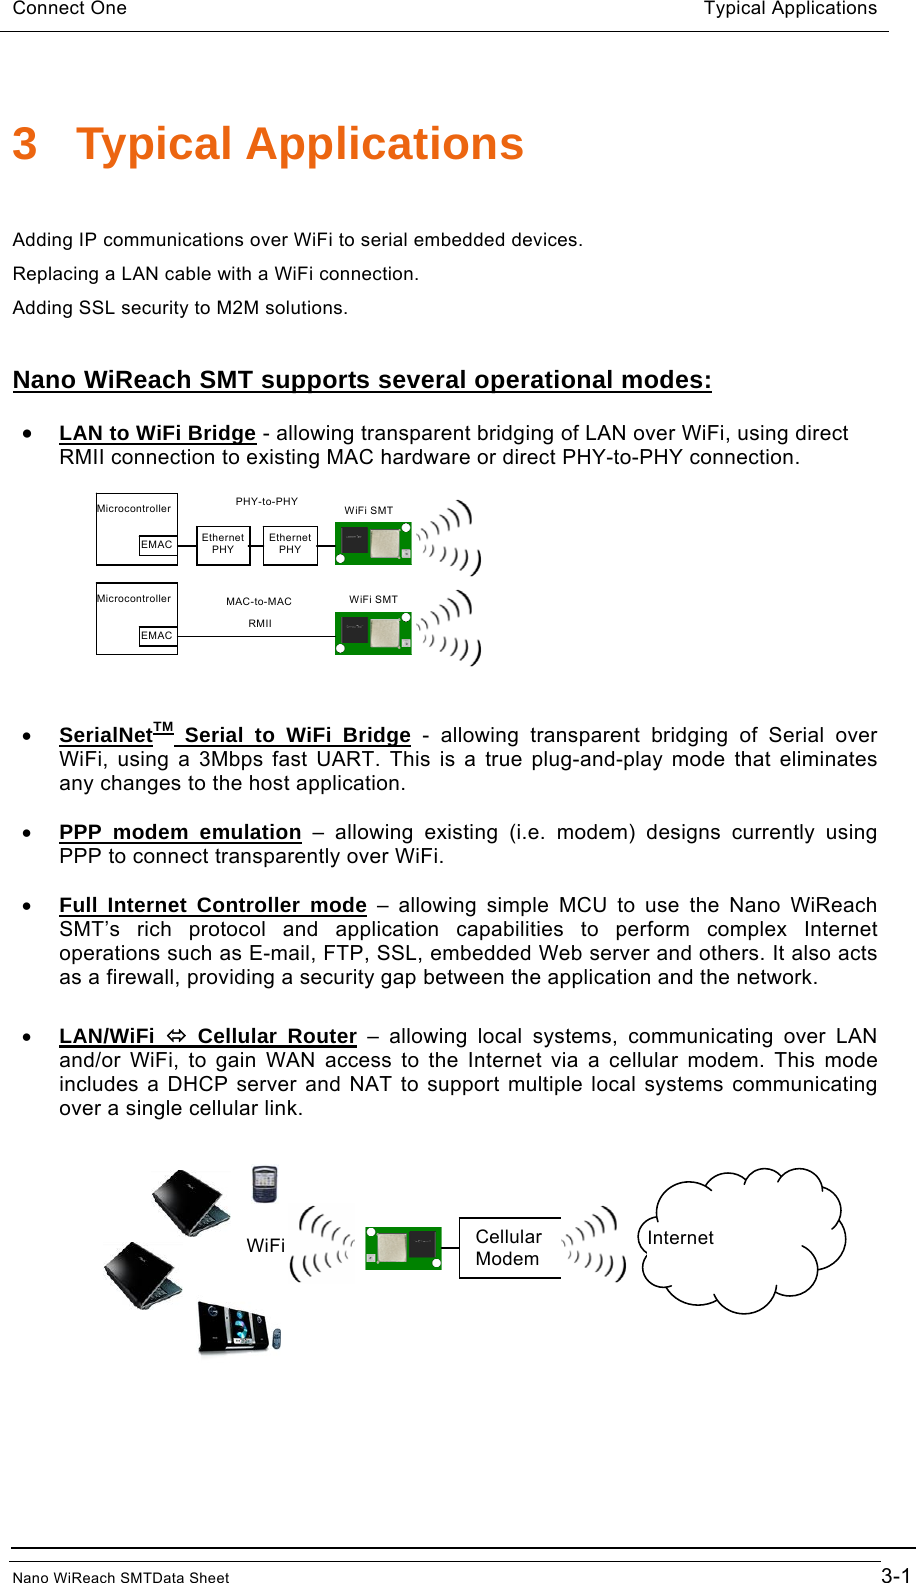 Connect One                                       Typical Applications  3 Typical Applications  Adding IP communications over WiFi to serial embedded devices. Replacing a LAN cable with a WiFi connection. Adding SSL security to M2M solutions.  Nano WiReach SMT supports several operational modes:  • LAN to WiFi Bridge - allowing transparent bridging of LAN over WiFi, using direct RMII connection to existing MAC hardware or direct PHY-to-PHY connection. EMAC Ethernet PHY Ethernet PHY WiFi SMT RMII PHY-to-PHY MAC-to-MAC EMAC WiFi SMT Microcontroller Microcontroller   • SerialNetTM Serial to WiFi Bridge - allowing transparent bridging of Serial over WiFi, using a 3Mbps fast UART. This is a true plug-and-play mode that eliminates any changes to the host application.  • PPP modem emulation – allowing existing (i.e. modem) designs currently using PPP to connect transparently over WiFi.  • Full Internet Controller mode – allowing simple MCU to use the Nano WiReach SMT’s rich protocol and application capabilities to perform complex Internet operations such as E-mail, FTP, SSL, embedded Web server and others. It also acts as a firewall, providing a security gap between the application and the network.  • LAN/WiFi  Ù Cellular Router – allowing local systems, communicating over LAN and/or WiFi, to gain WAN access to the Internet via a cellular modem. This mode includes a DHCP server and NAT to support multiple local systems communicating over a single cellular link.    Cellular Modem  Internet WiFiNano WiReach SMTData Sheet                                        3-1 